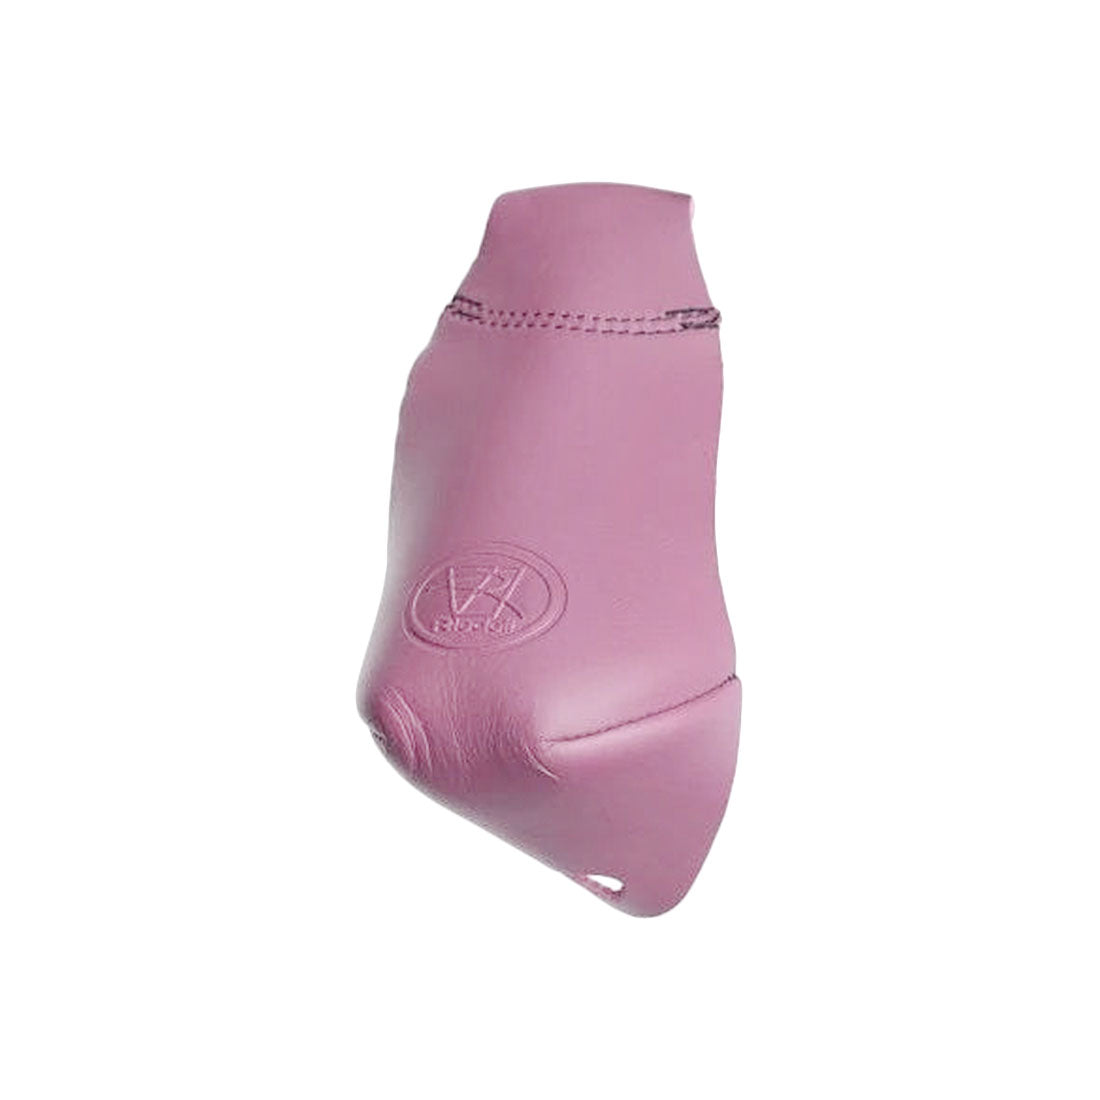 Riedell Toe Cap Pro Fit 2pk - Leather Pink Roller Skate Hardware and Parts